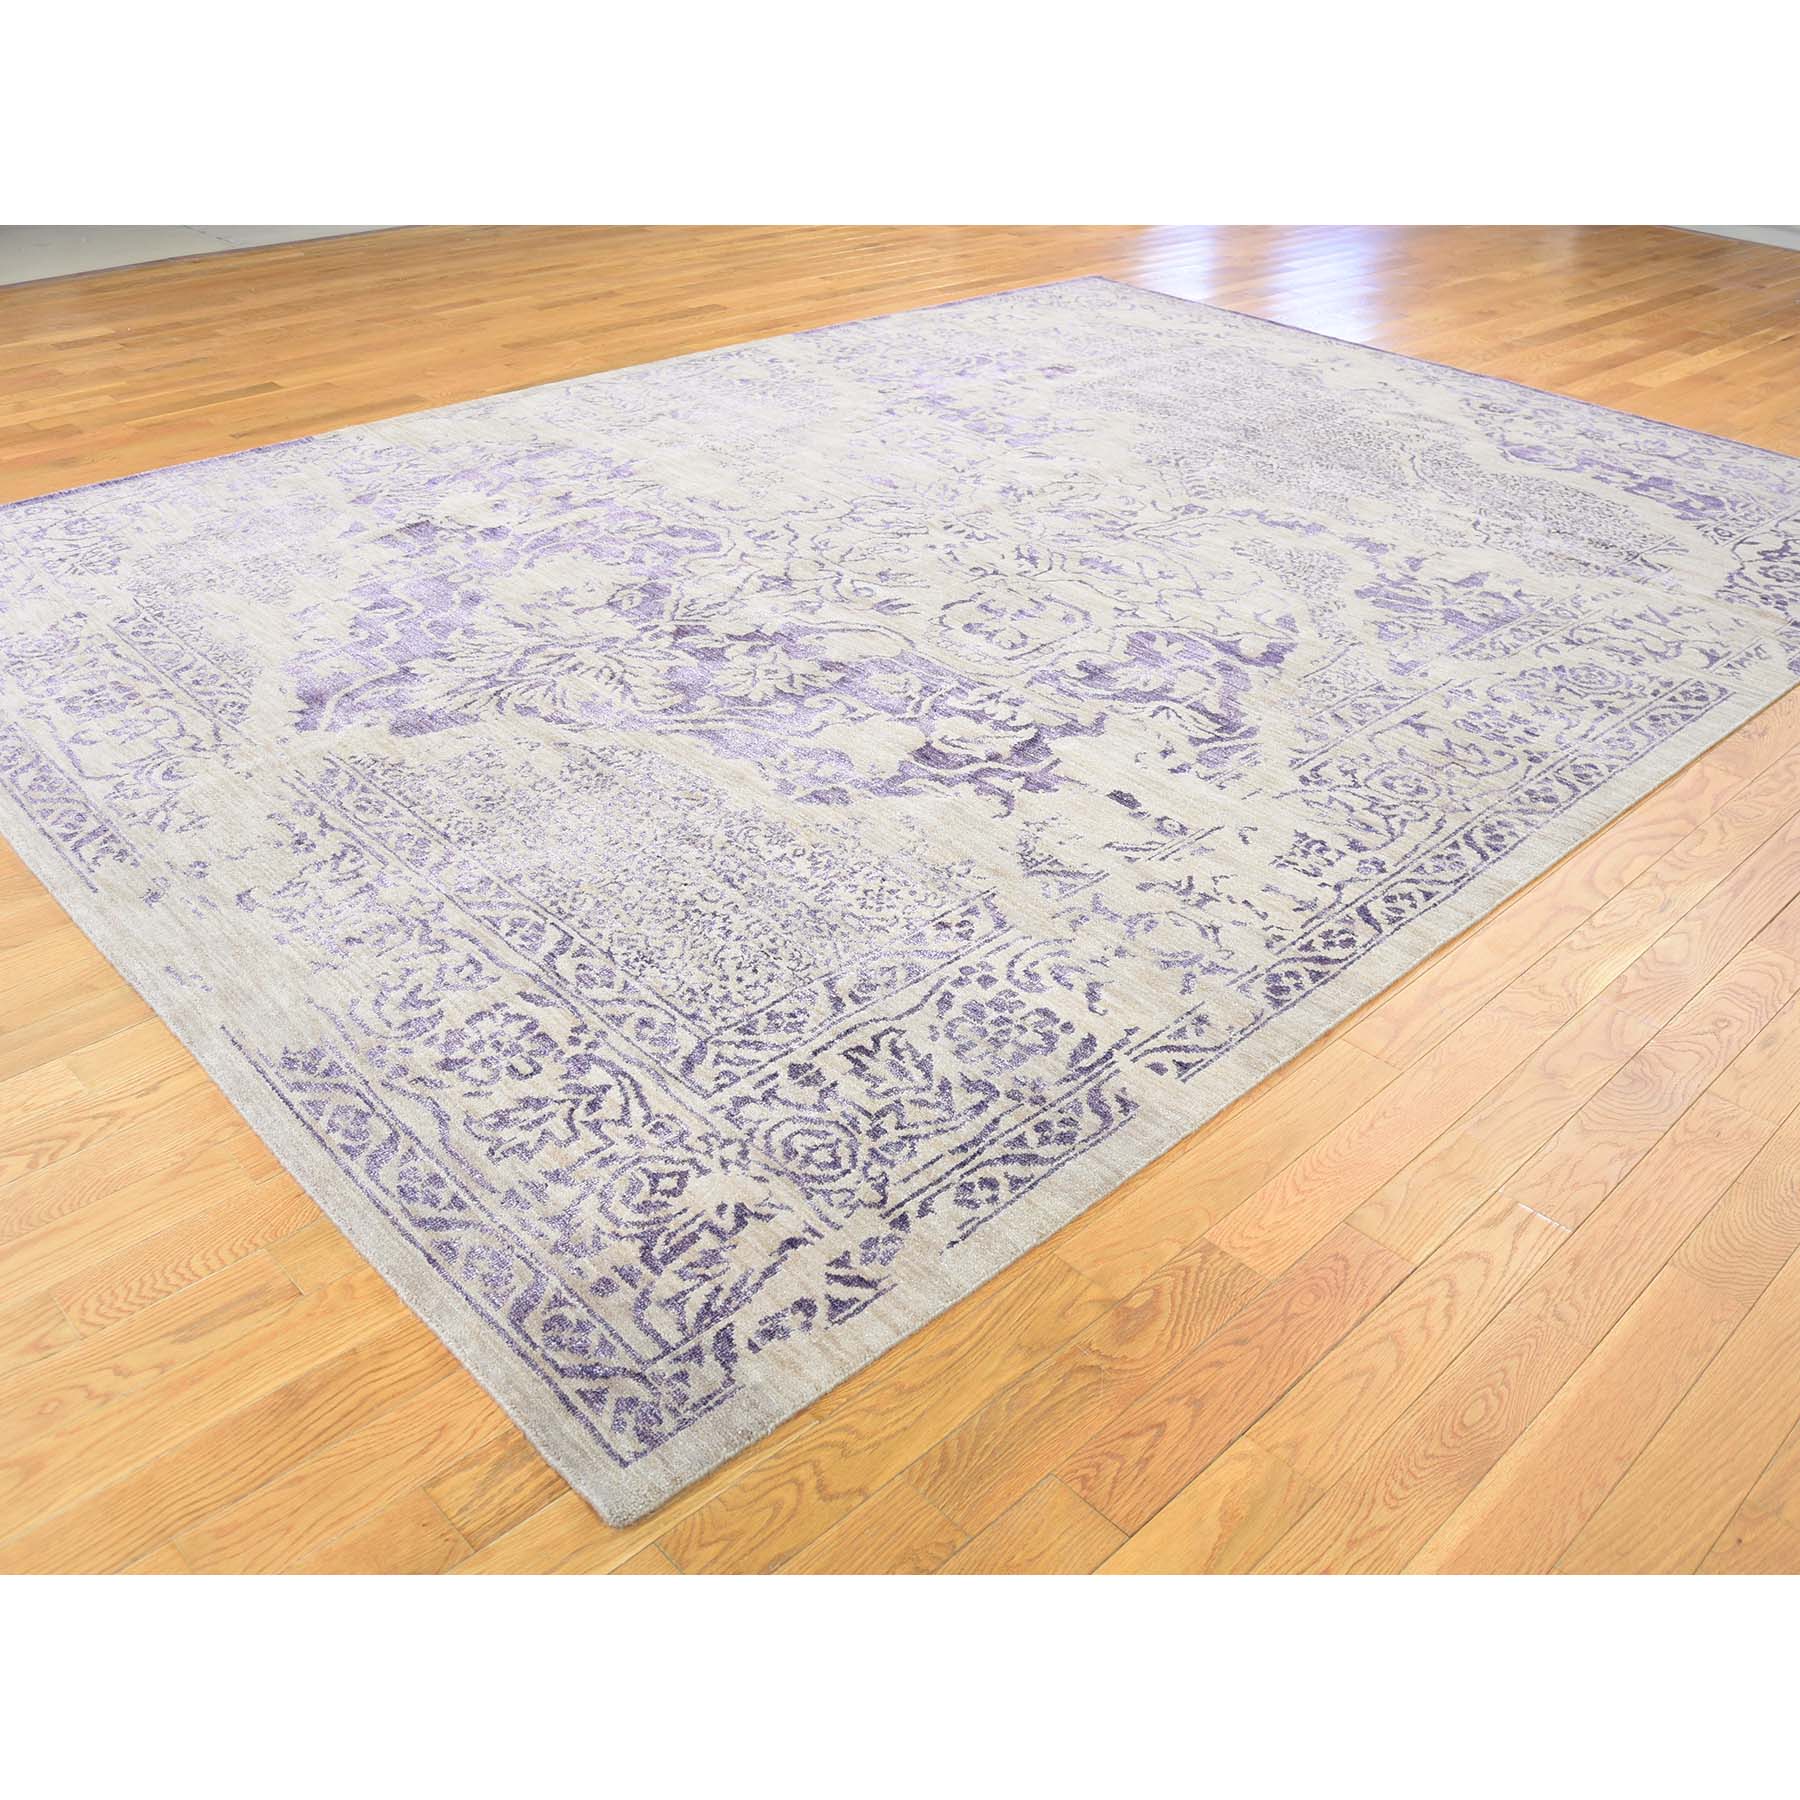 9-x12- Wool and Silk Tone on Tone Broken Design Kashan Ultra Violet Hand Knotted Rug 